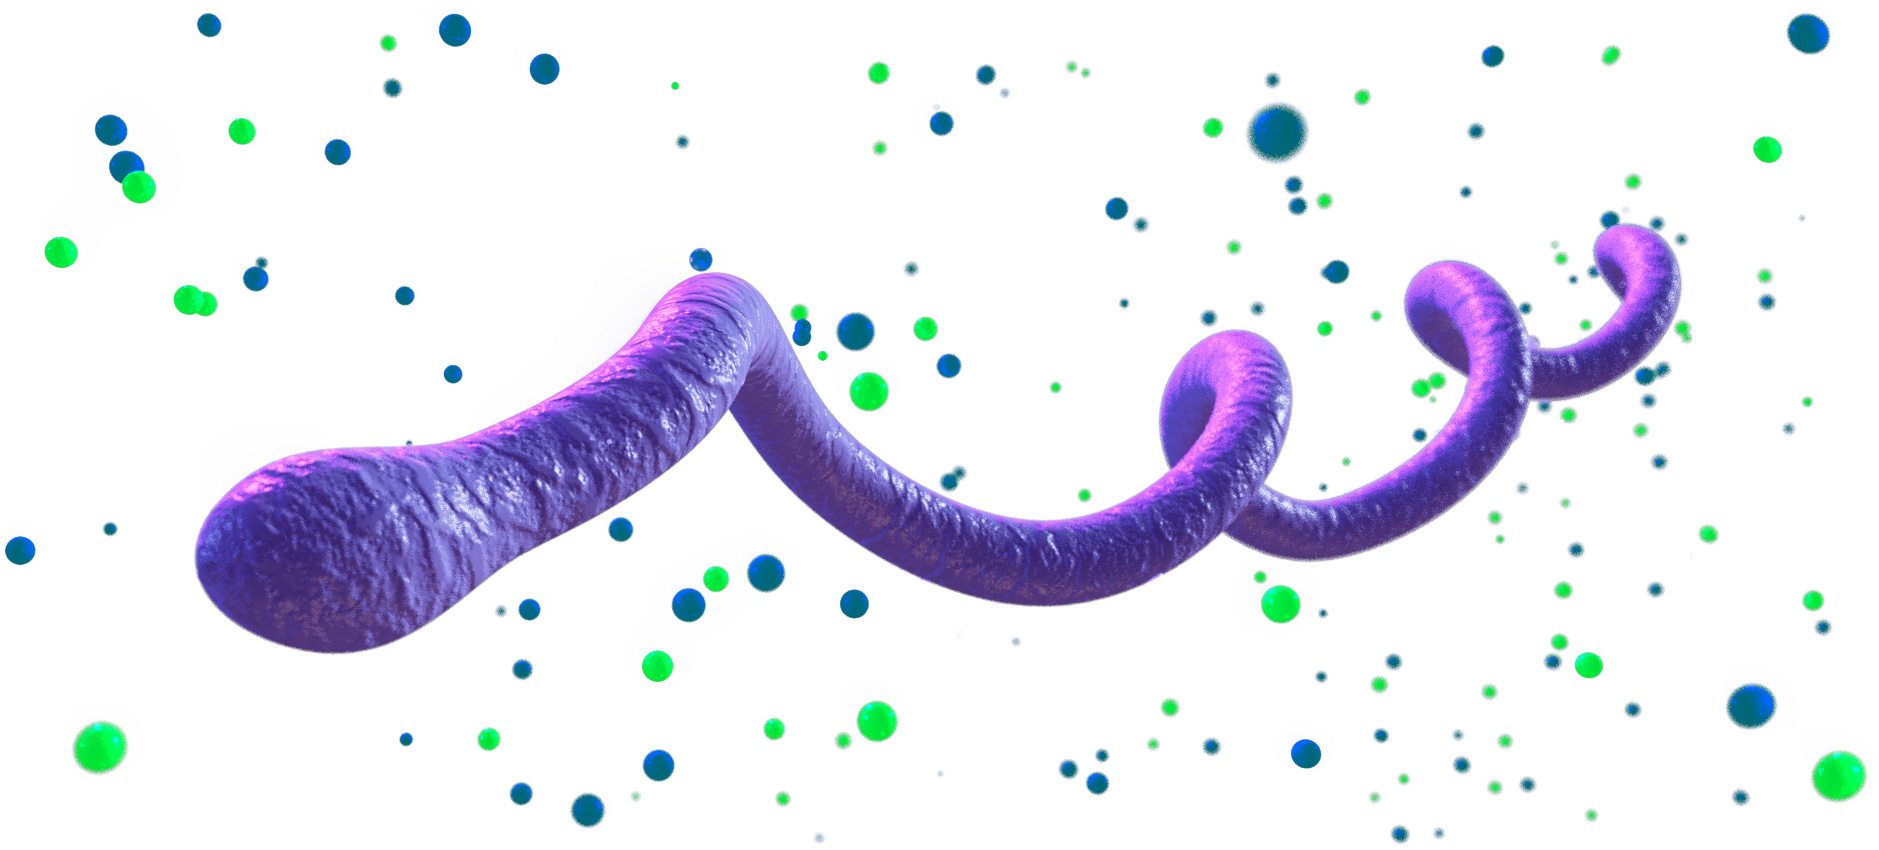 The borrelia spirochete is depicted here giving off various endotoxins, neurotoxins, and biotoxins